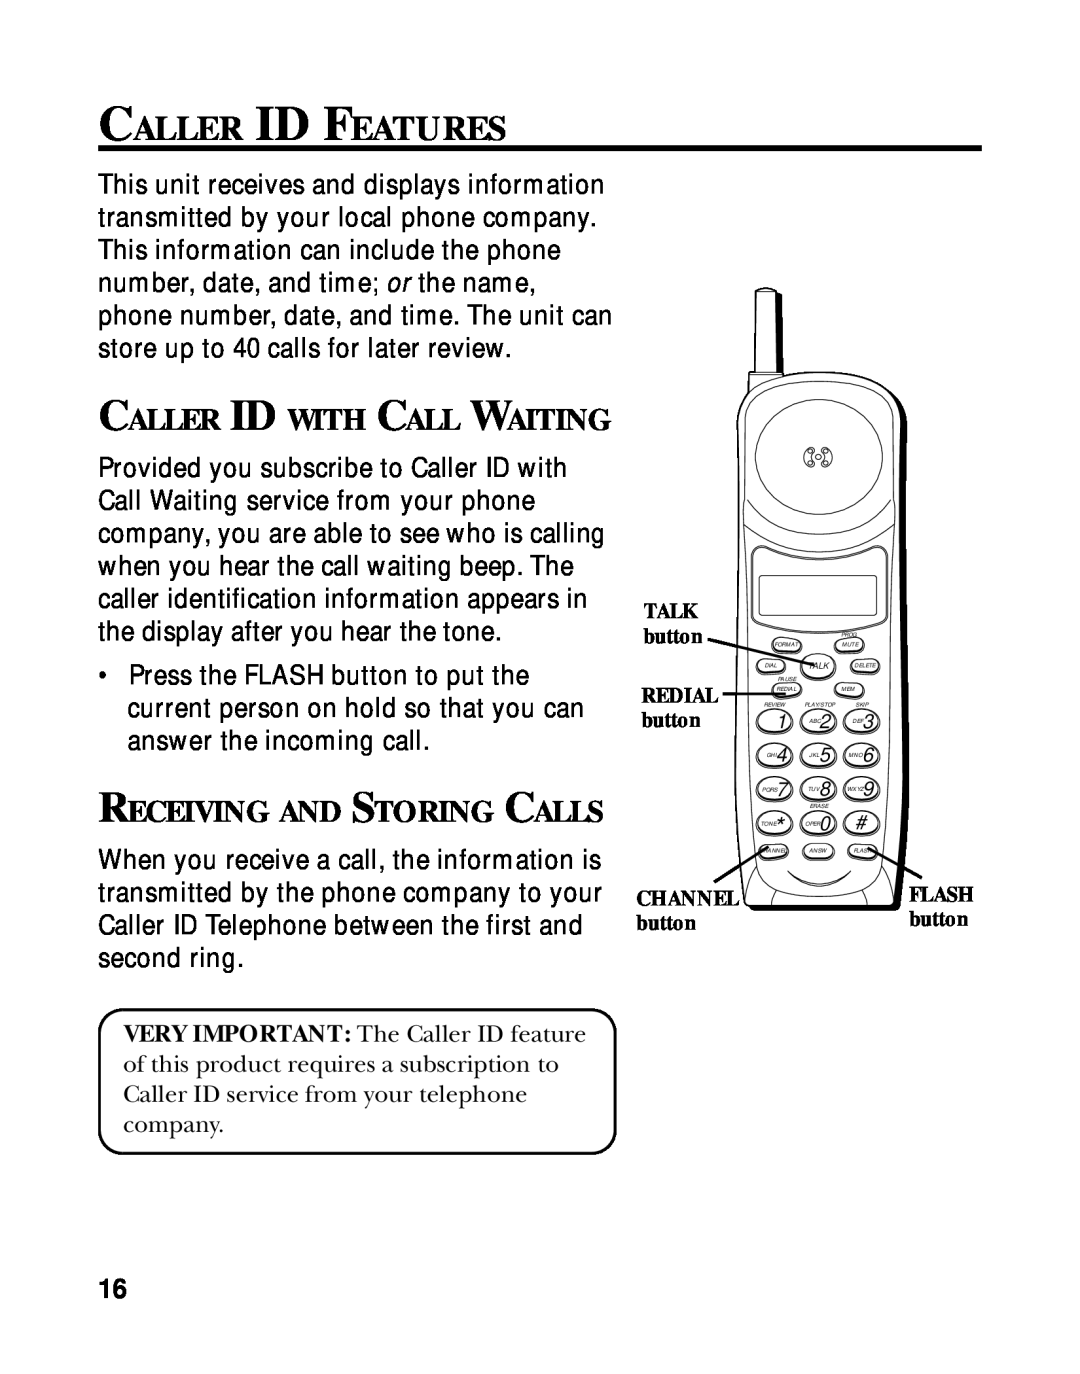 RCA 900 MHz manual Caller Id Features, Receiving And Storing Calls, Caller Id With Call Waiting 